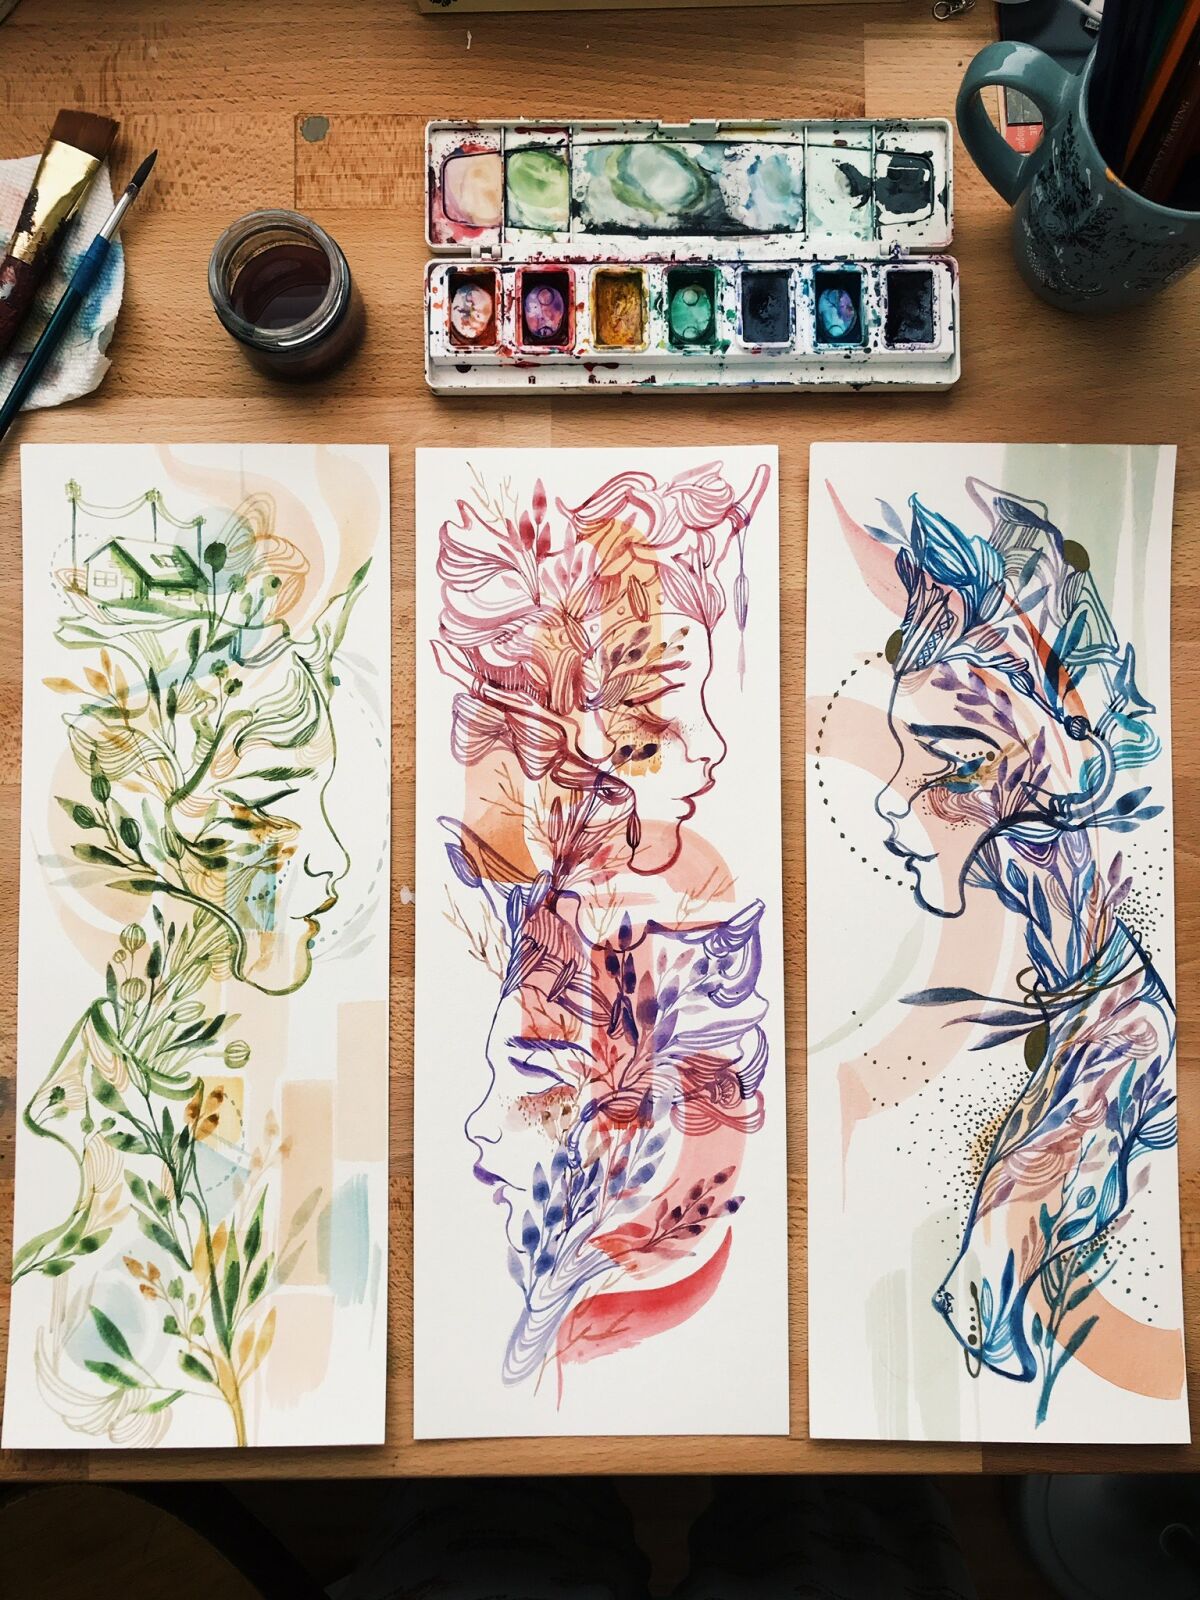 "The Colors of Summer" series by Mary Jhun (watercolor)